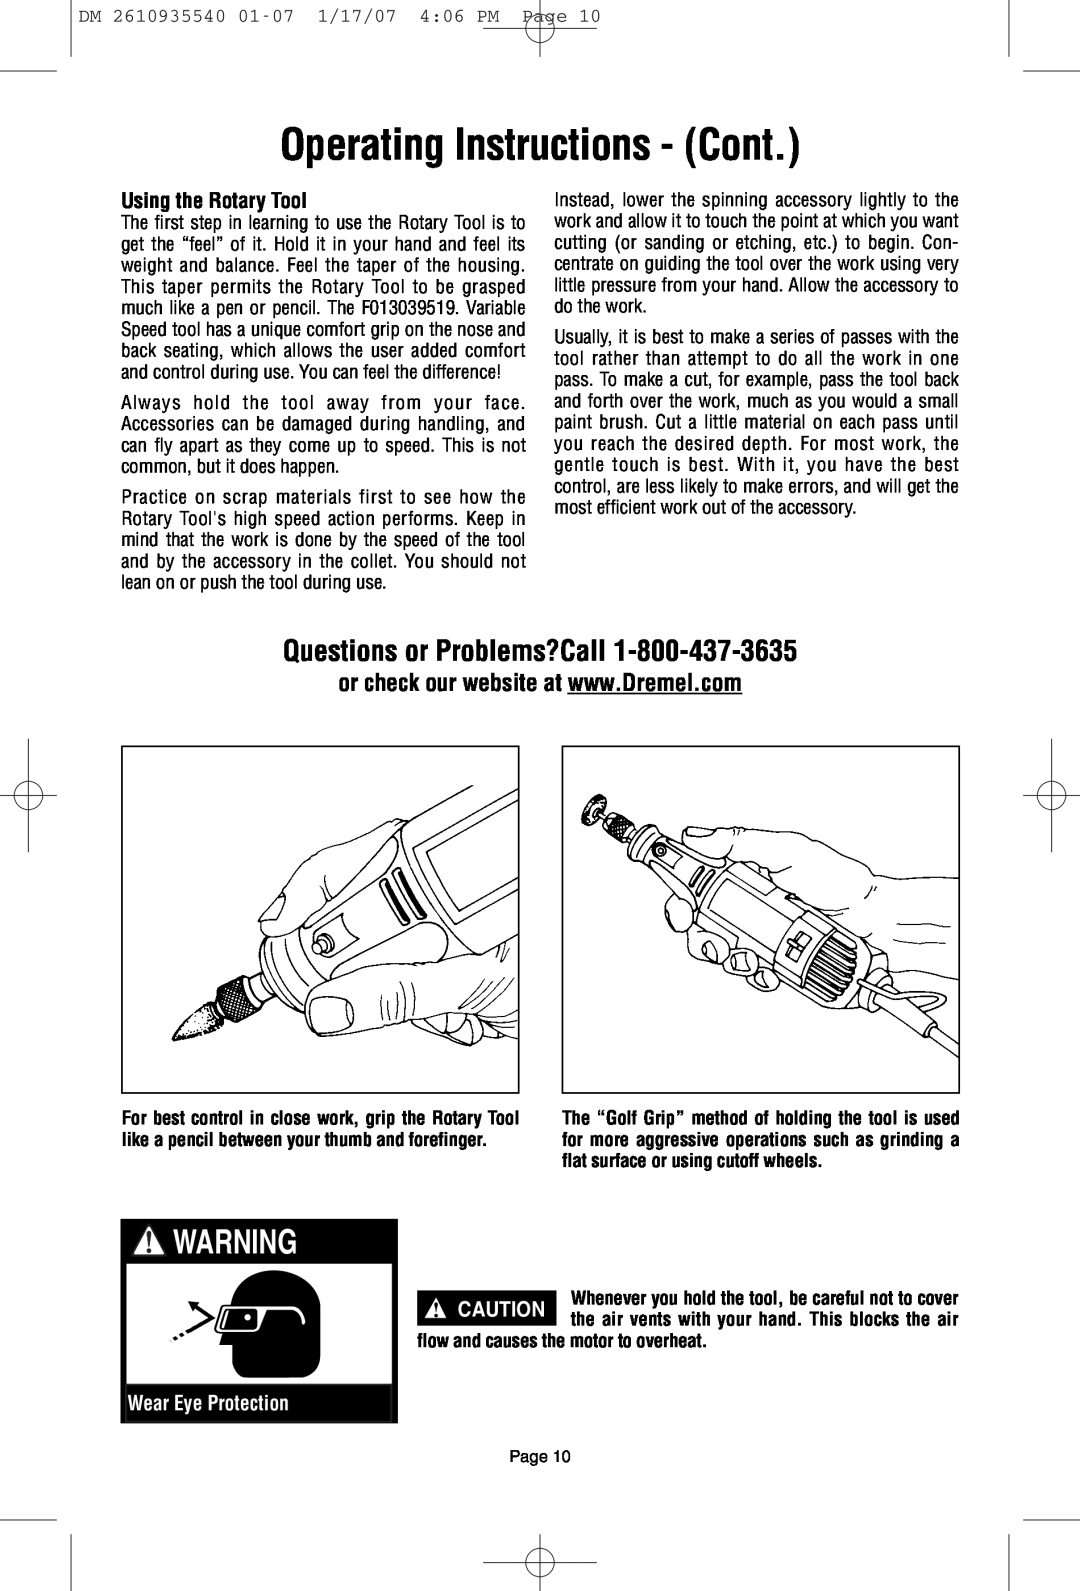 Dremel F013039519 Operating Instructions - Cont, Questions or Problems?Call, Using the Rotary Tool, Wear Eye Protection 